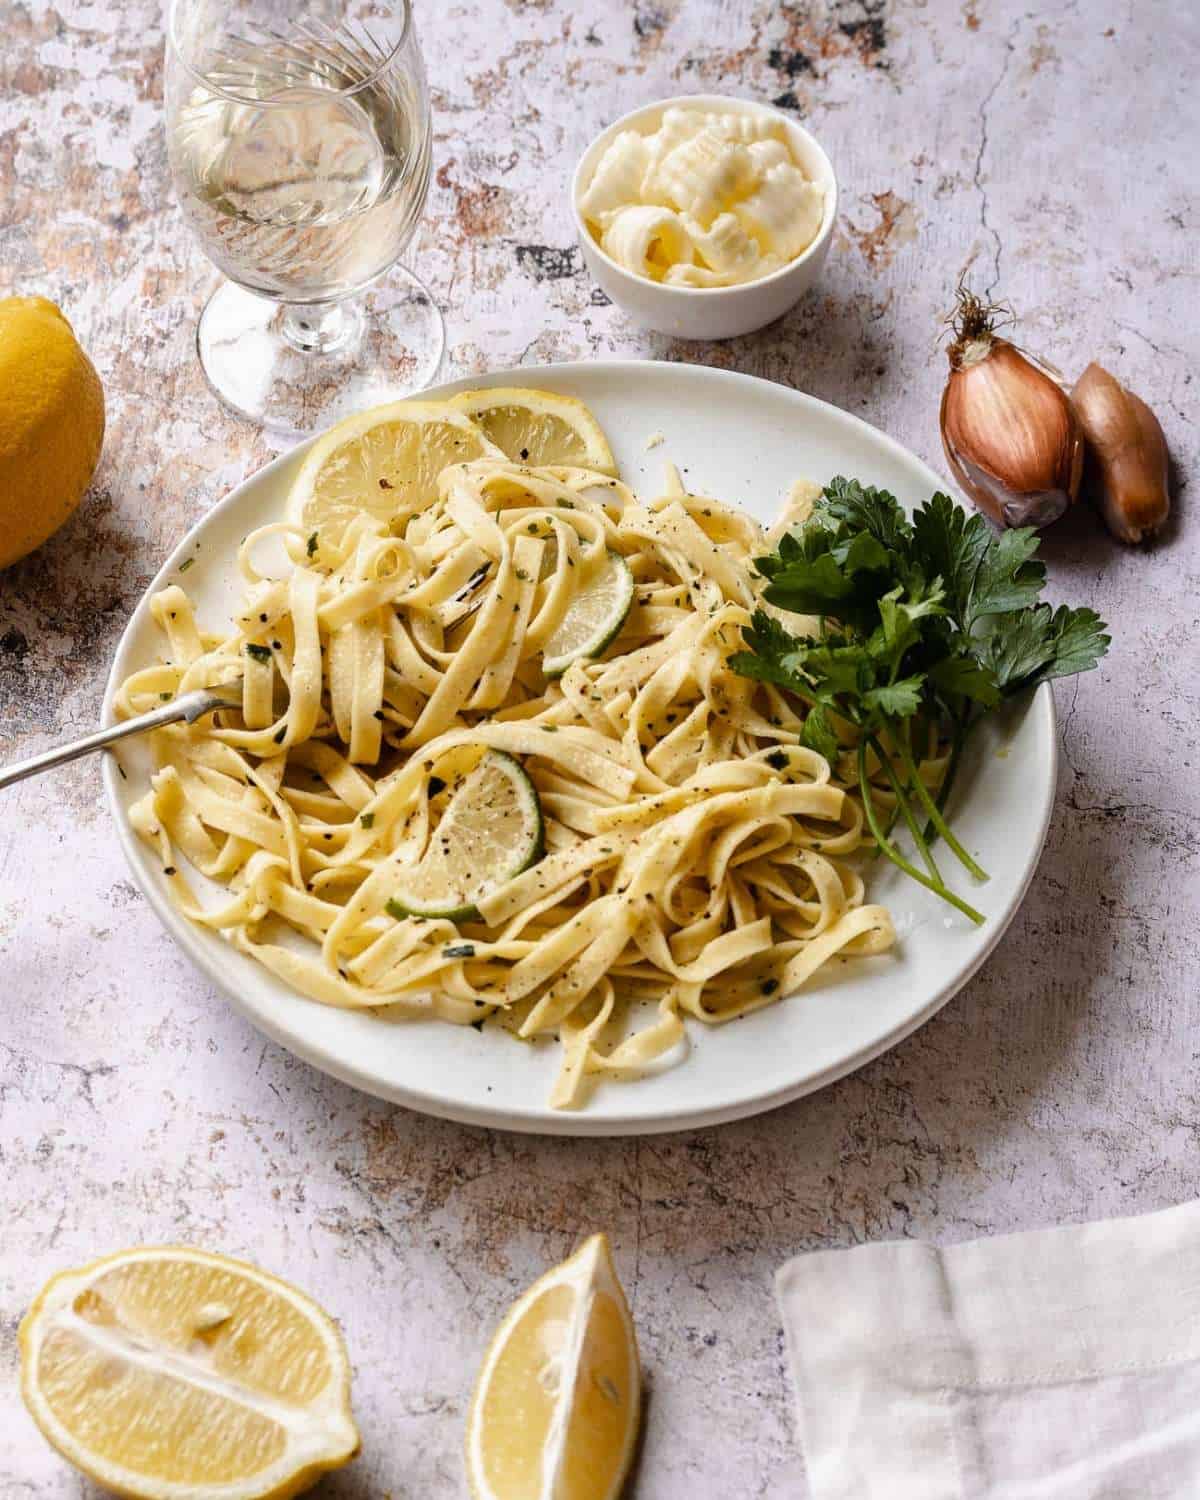 Lemon Tagliatelle in a white plate with a fork. The pasta is garnished with fresh parsley and sliced lemons